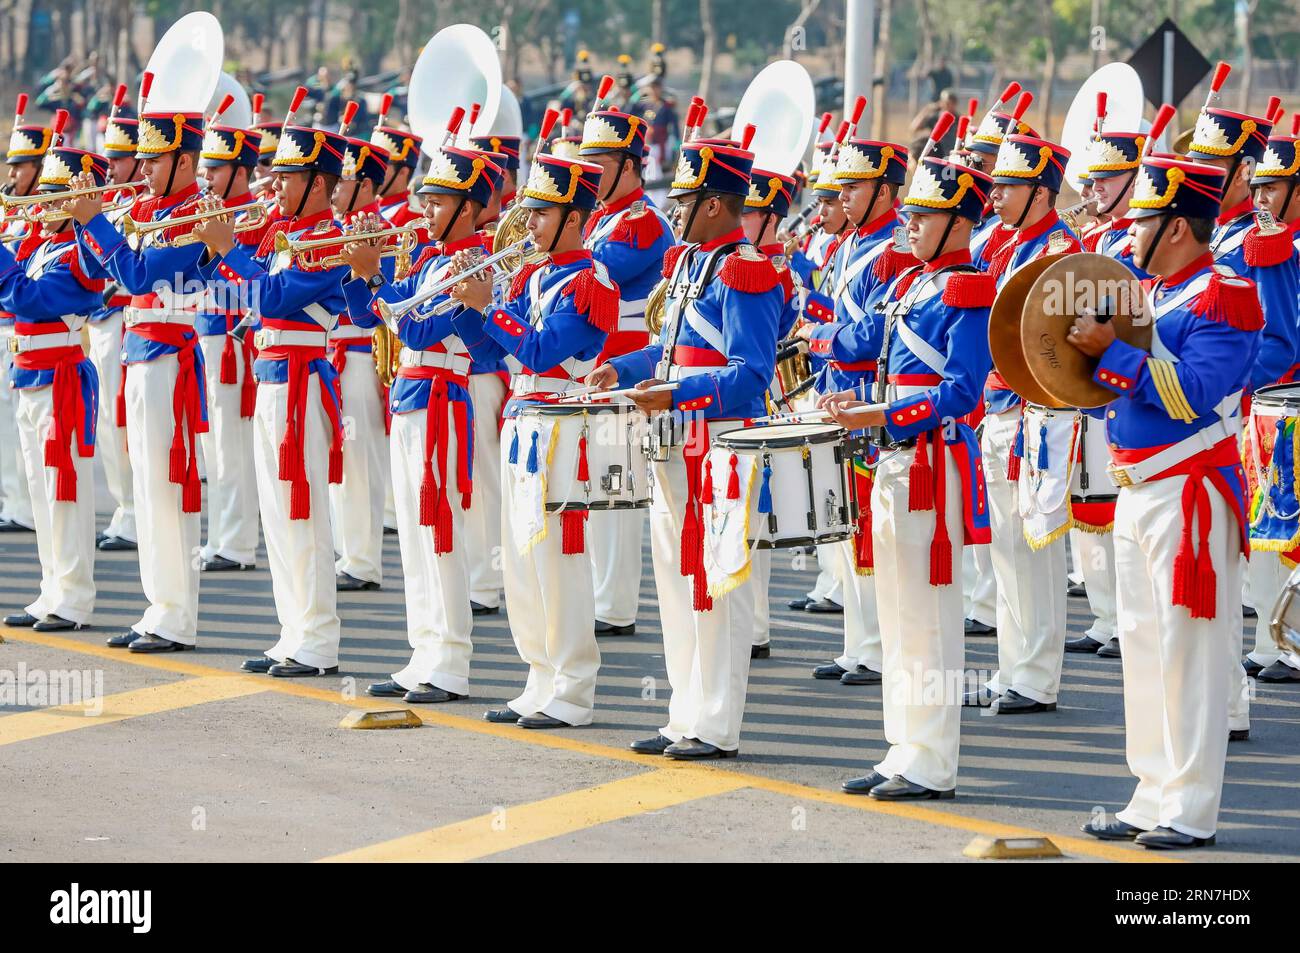 Brazil and Military music